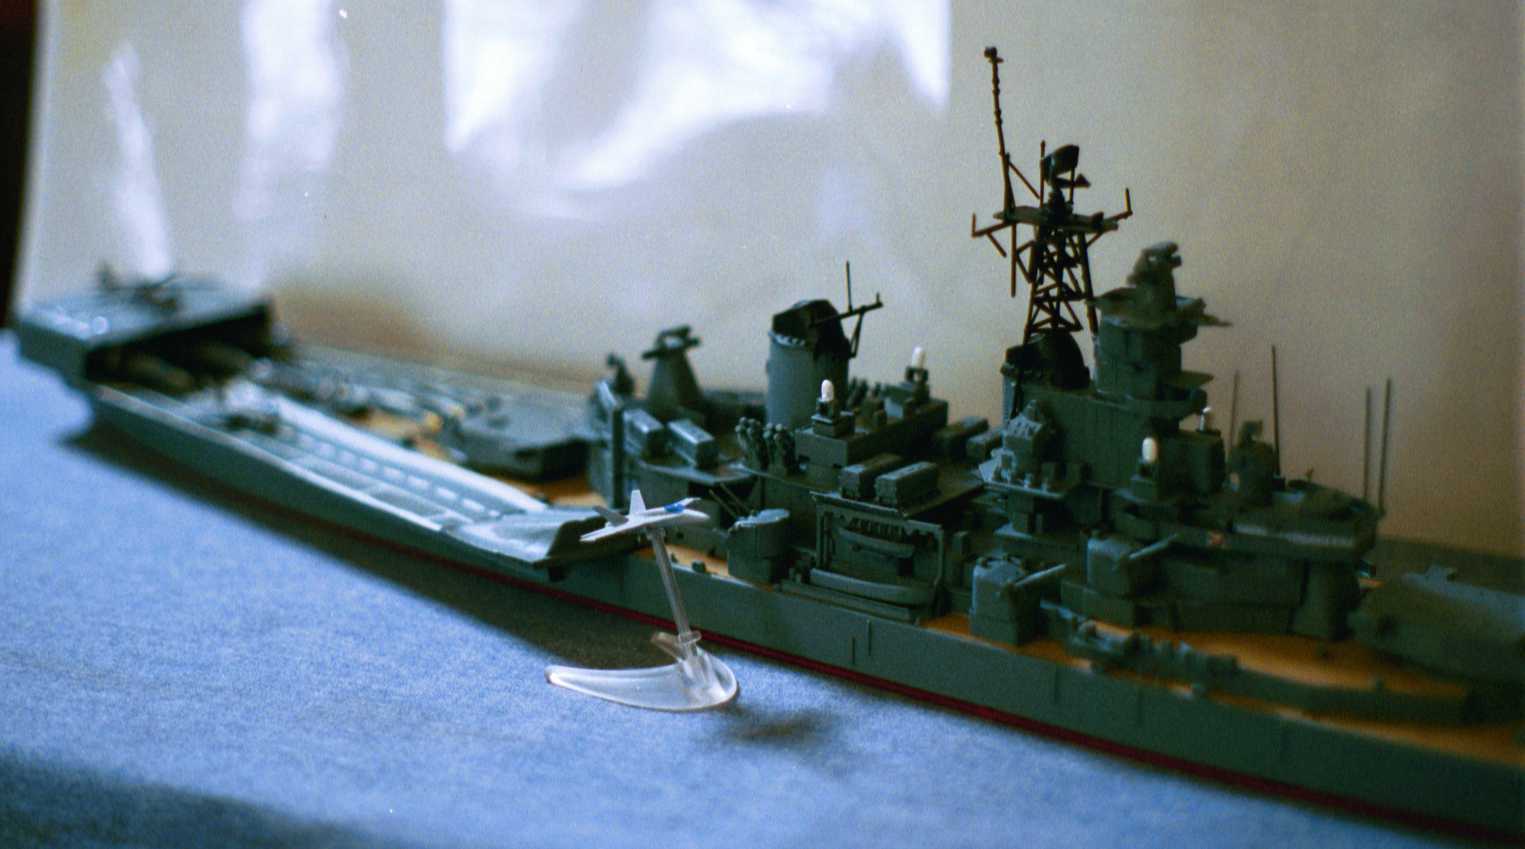 Hasegawa 1/700 Water Line Series Maritime Self-Defense Force Aegis destroyers town council Model 030